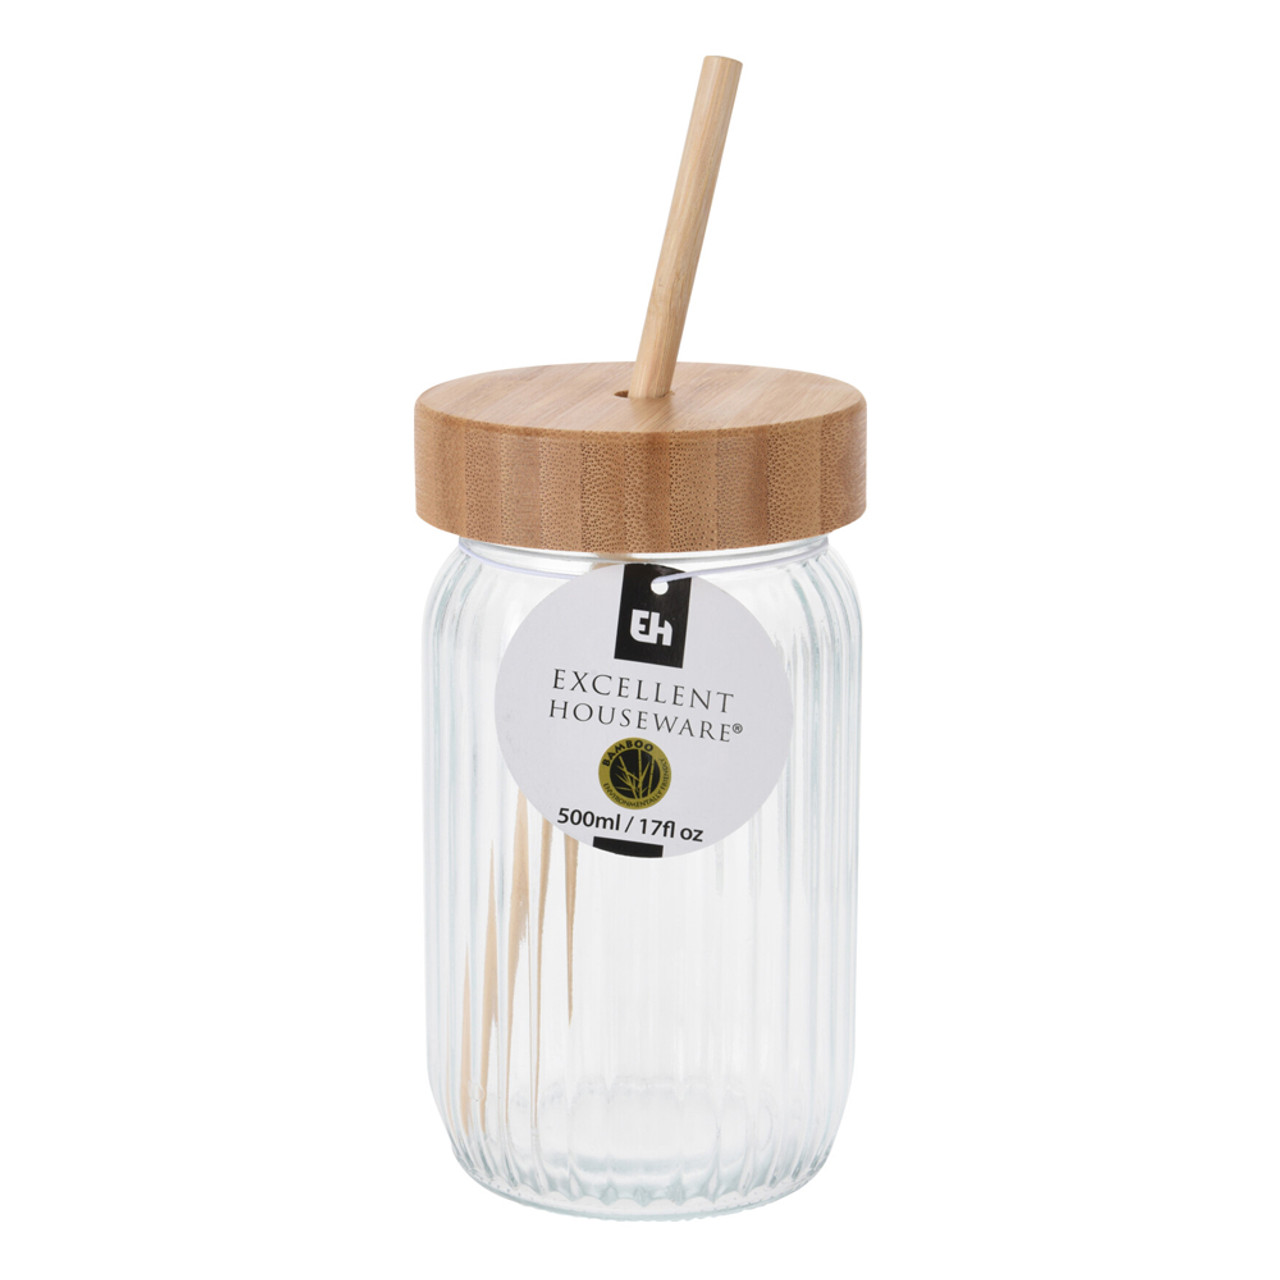 https://cdn11.bigcommerce.com/s-c1lad9sfxl/images/stencil/1280x1280/products/23343/30045/Sustainable_Drinking_Glass_with_Bamboo_Lid_500ml__47451.1686731770.jpg?c=1